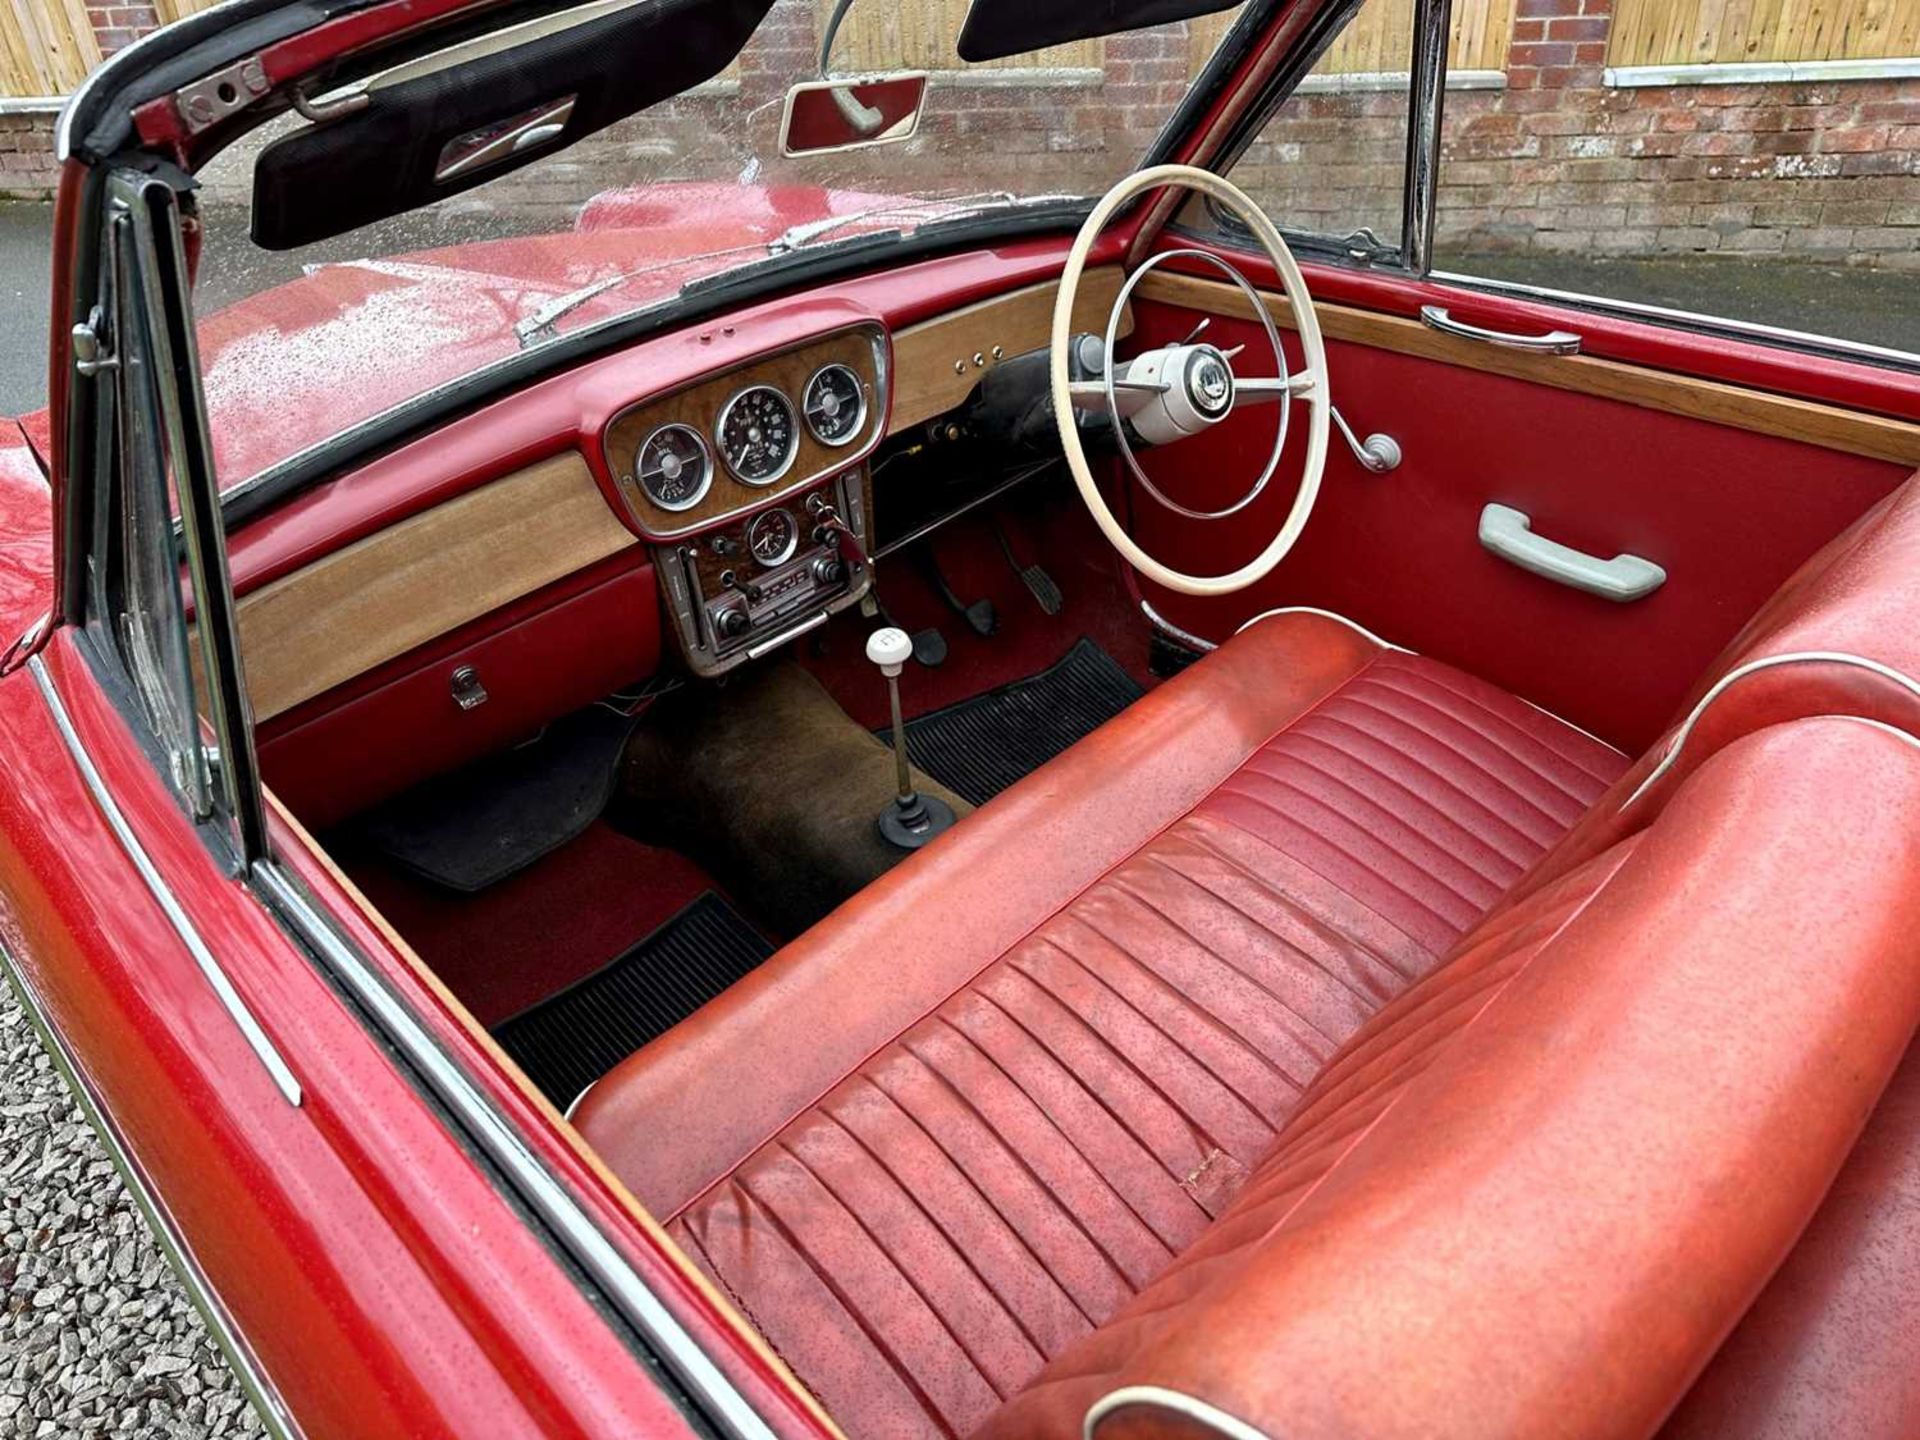 1961 Singer Gazelle Convertible Comes complete with overdrive, period radio and badge bar - Image 48 of 95